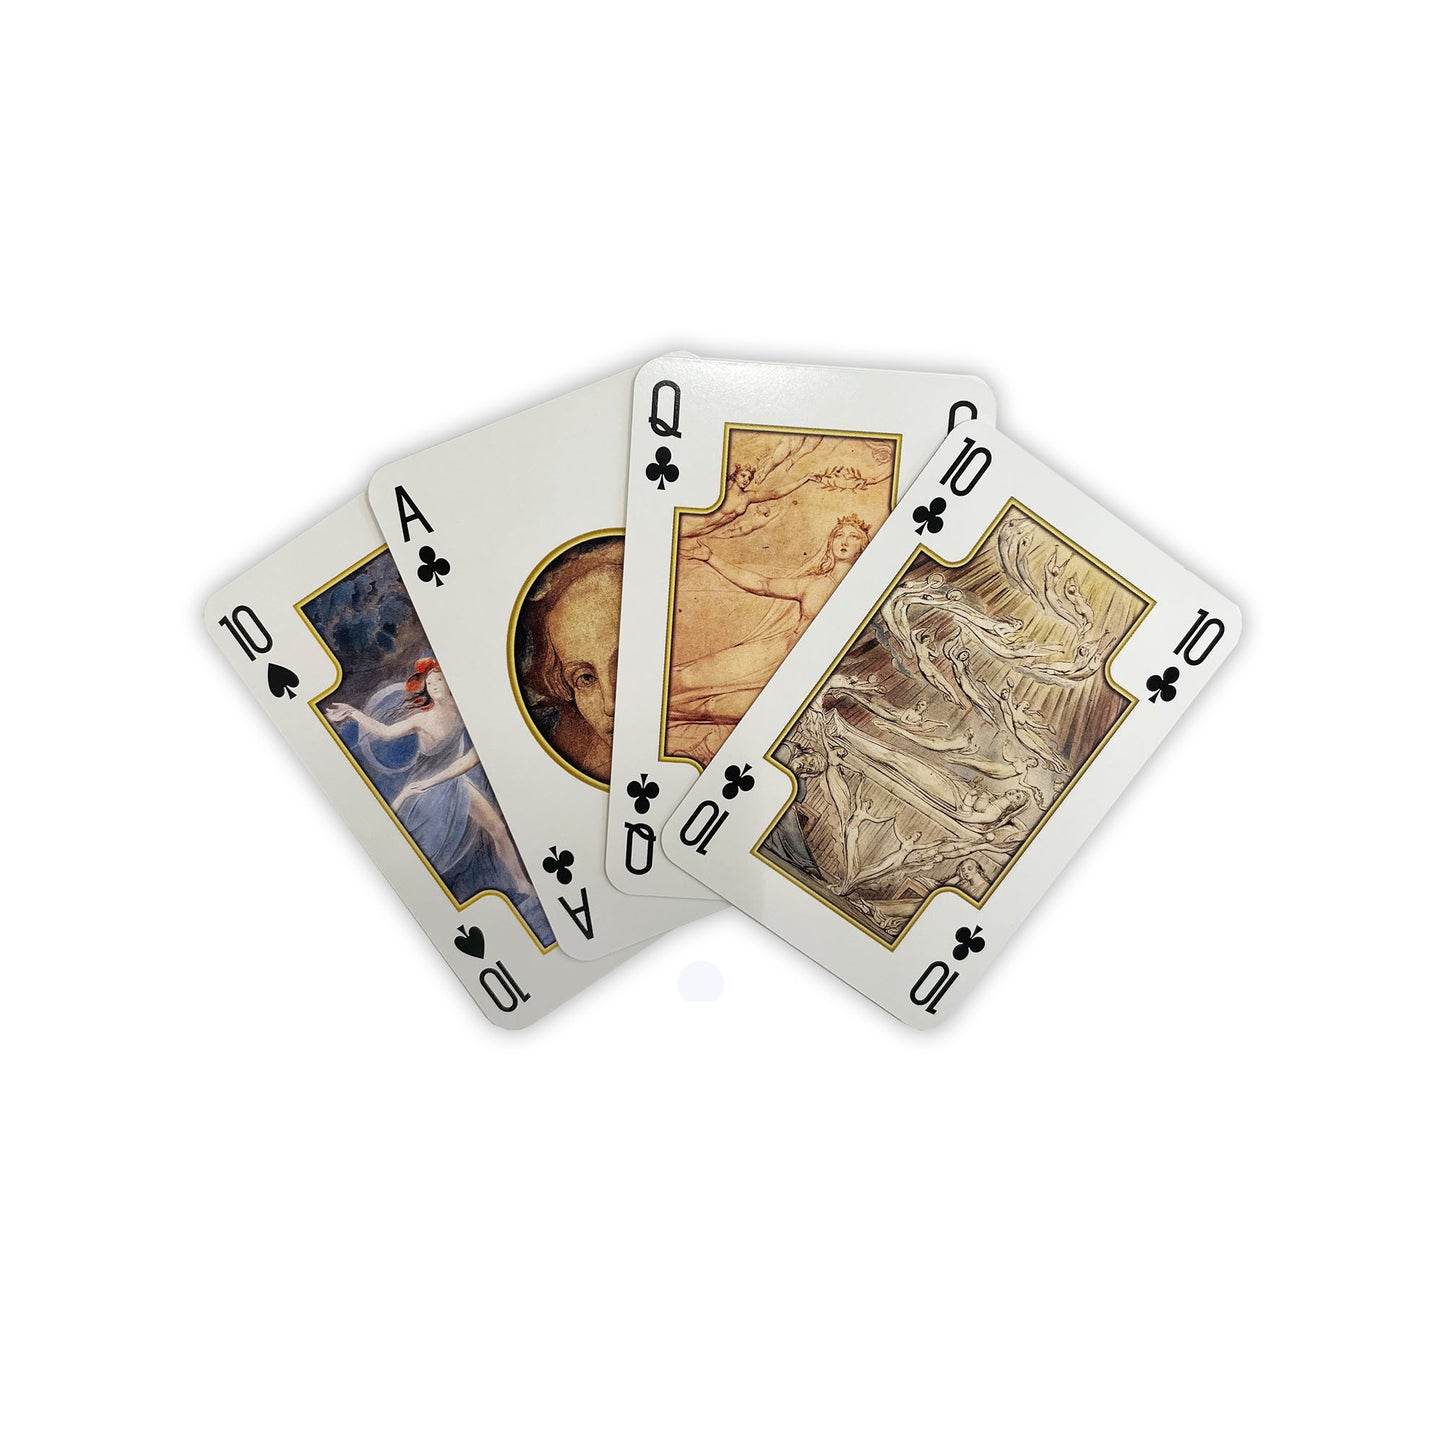 Shakespeare by William Blake - Playing cards